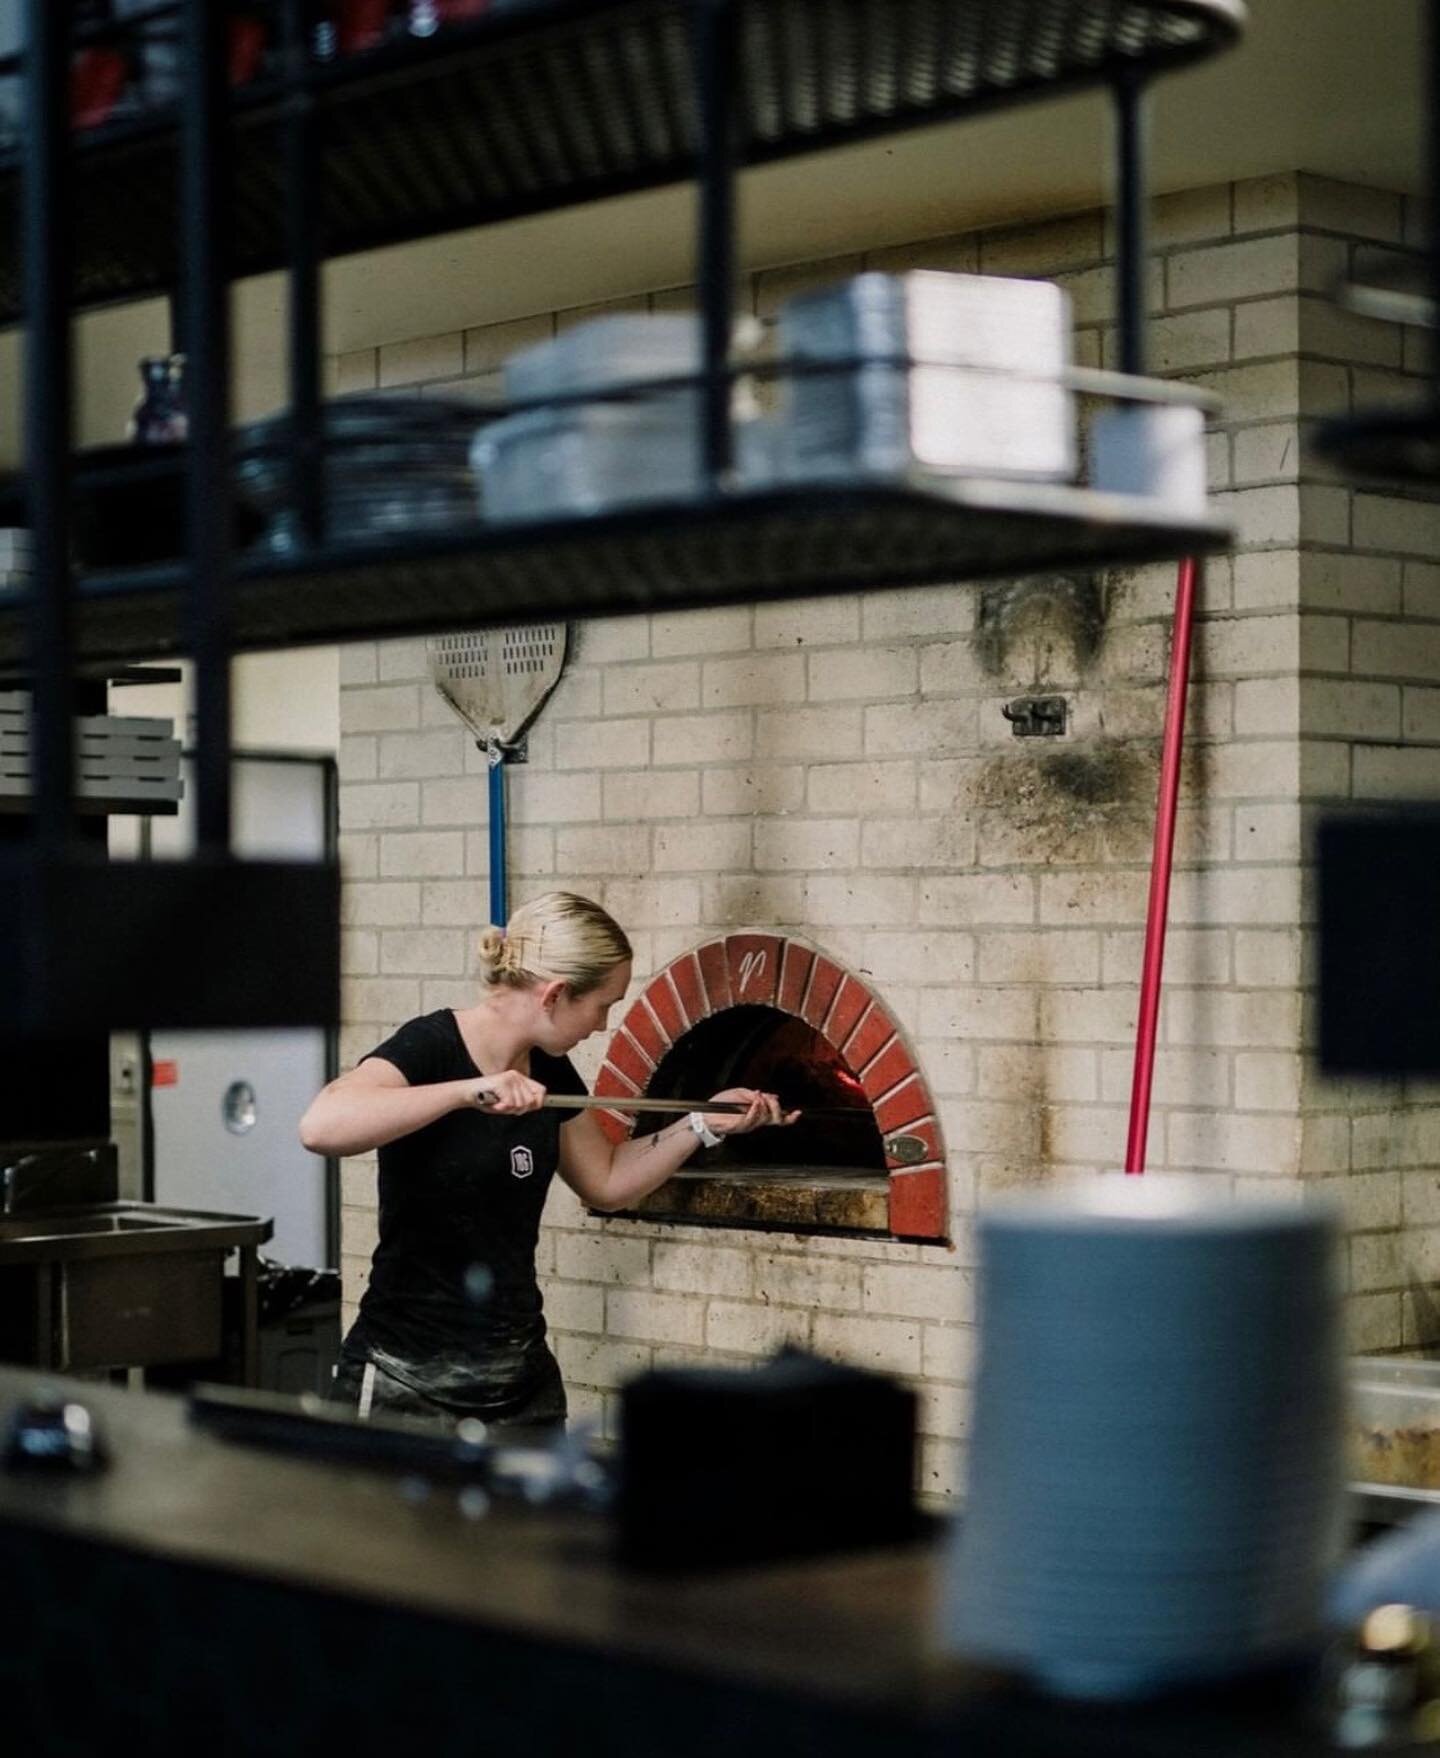 Serving up some of your favourites tonight! Bookings are available online, and takeaway is available through the Parry Street Garage website! 🍕
⠀⠀⠀⠀⠀⠀⠀⠀⠀
⠀⠀⠀⠀⠀⠀⠀⠀⠀
.
.
.
#parrystgarage #parrystreet #newcastle #newcastleau #newcastlensw #yesnewcastle